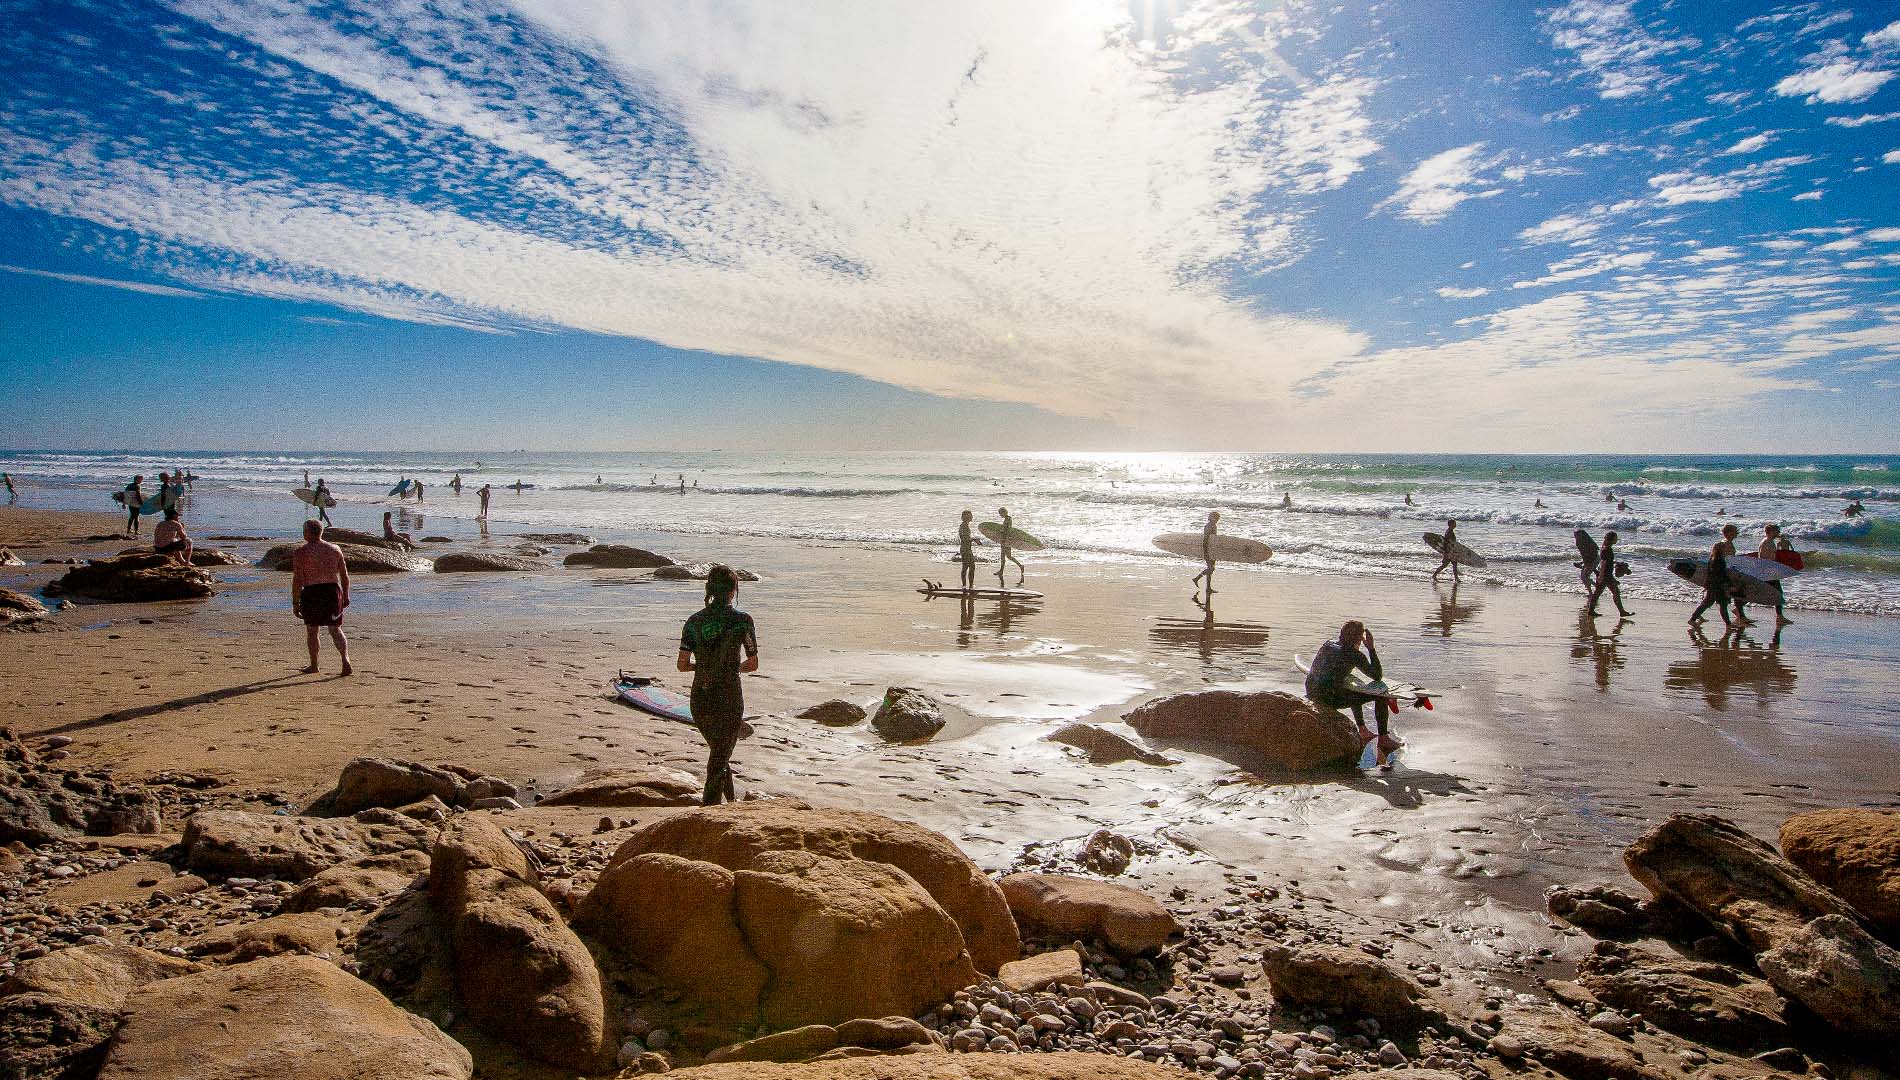 Surfers in Morocco